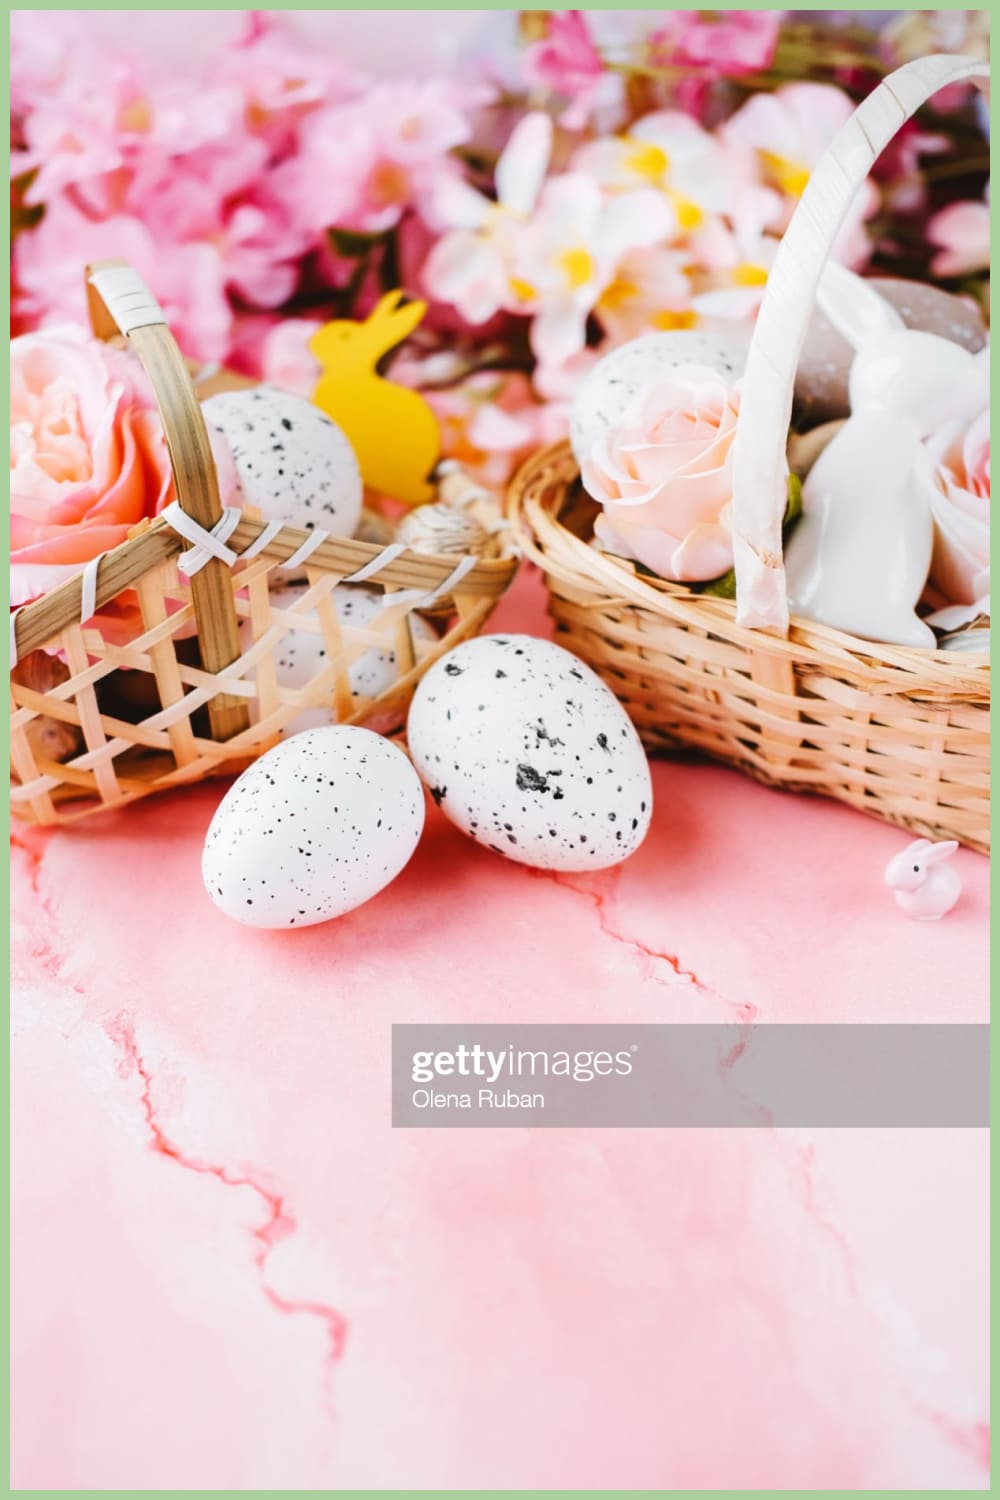 Quail eggs near wicker baskets with Easter stuff against blurred flowers on pink background.